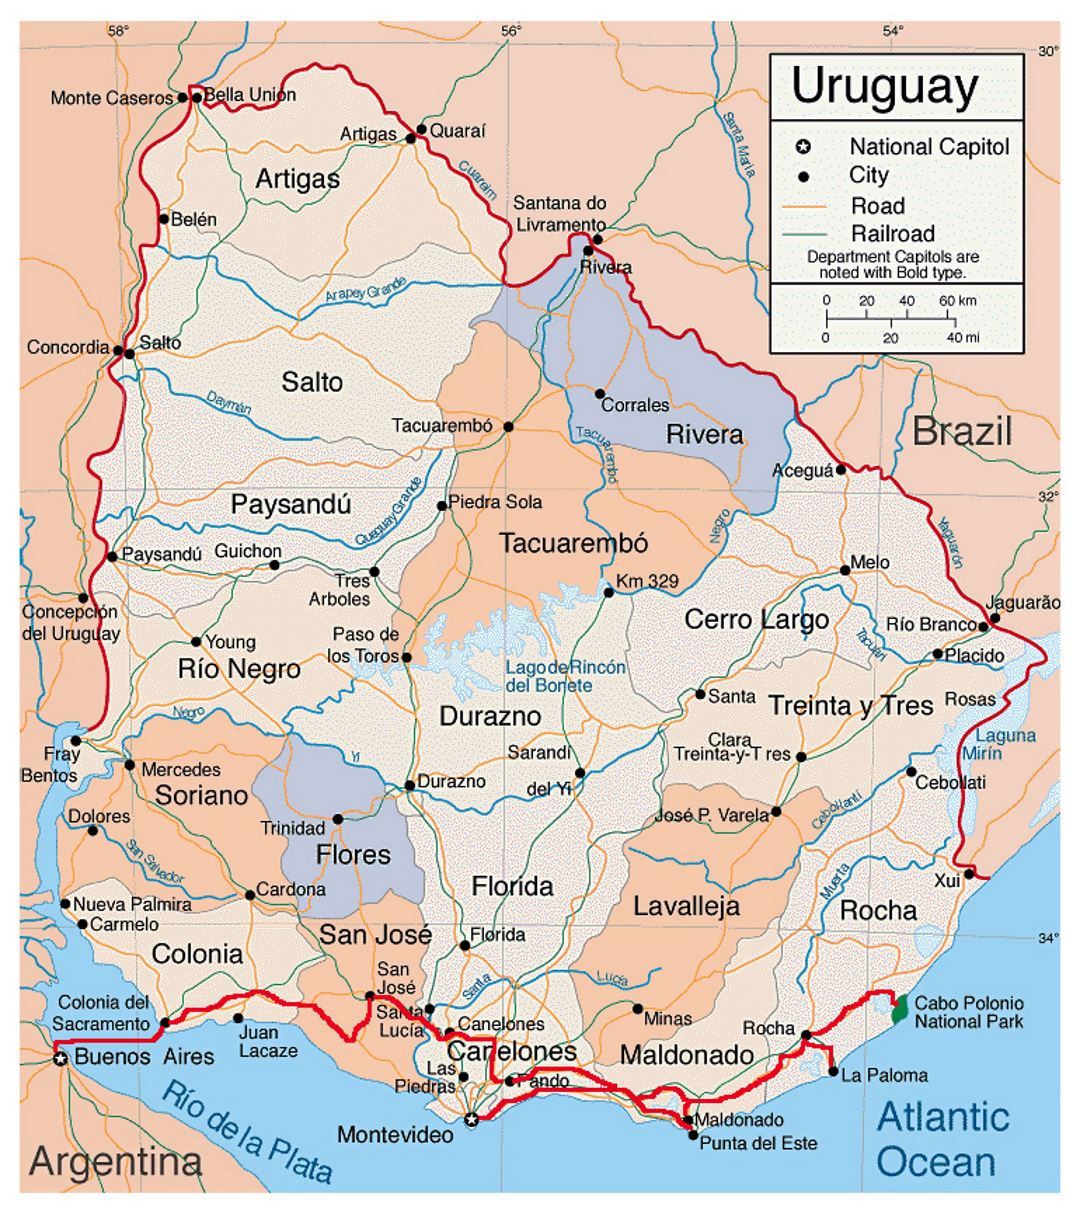 Detailed political and administreative map of Uruguay with roads and major cities